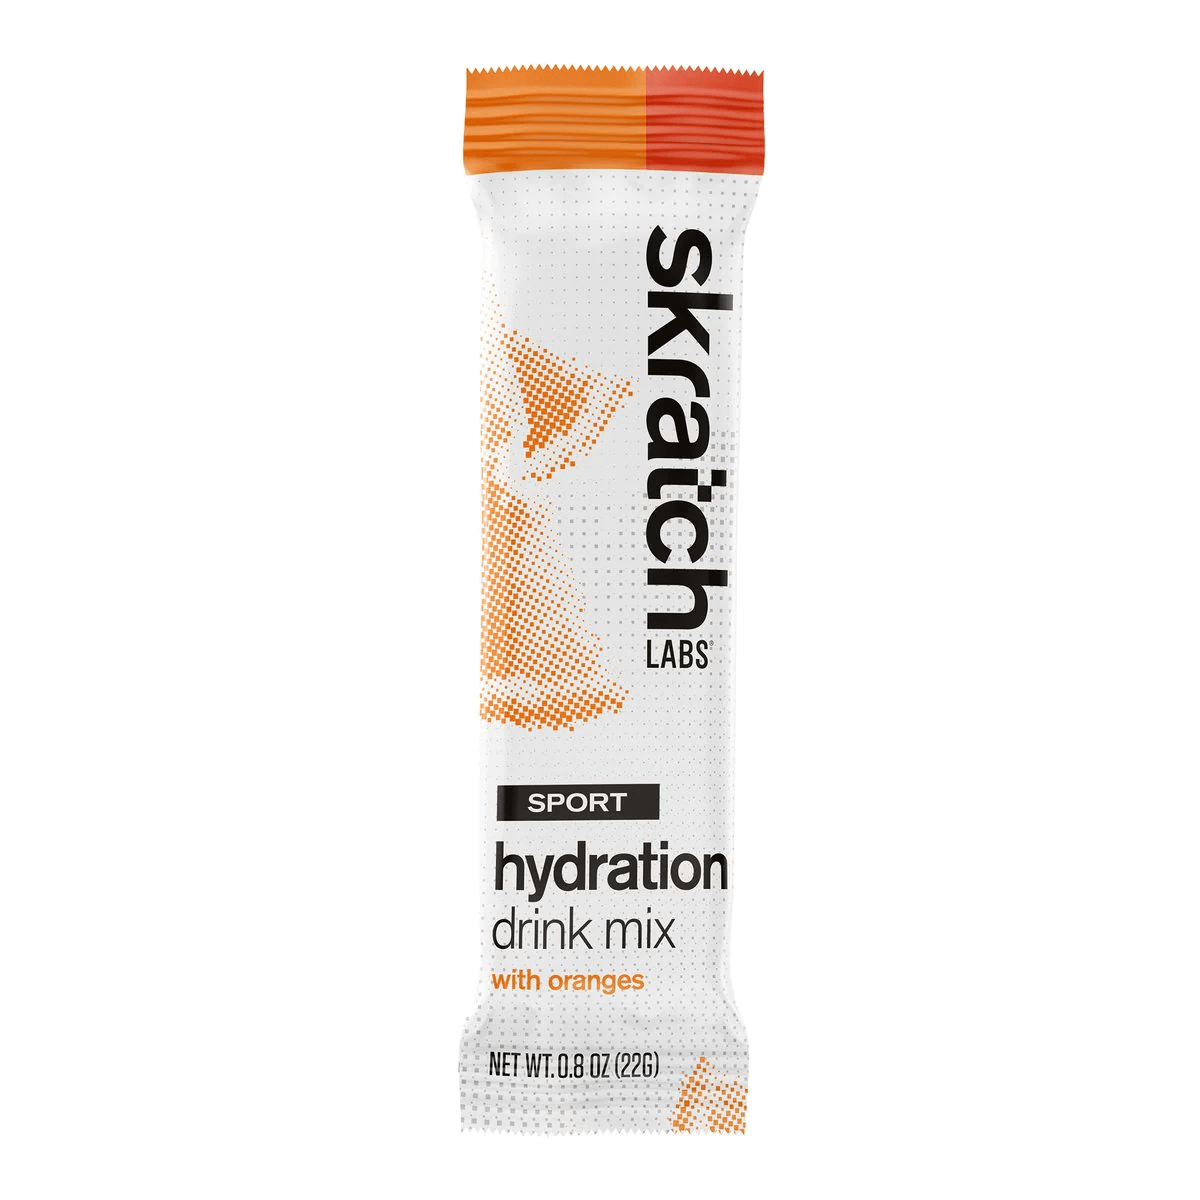 Skratch Labs Sport Hydration Drink Mix Box of 20 Oranges Other - Nutrition - Drink Mixes